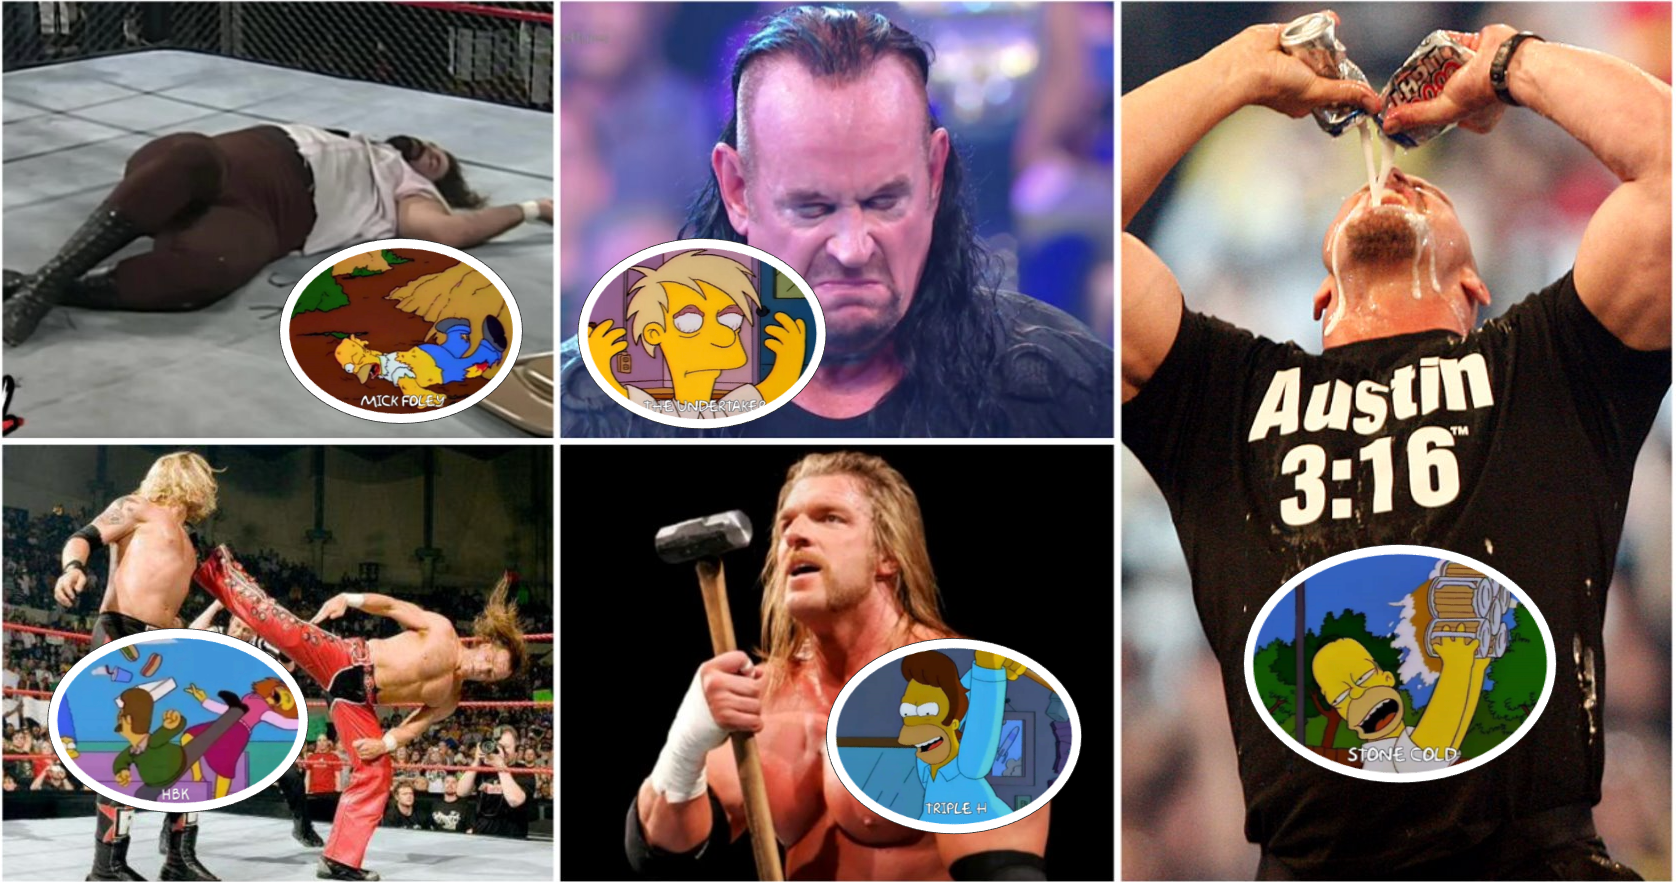 WWE Superstars from the Attitude Era as Simpsons characters thread is so good